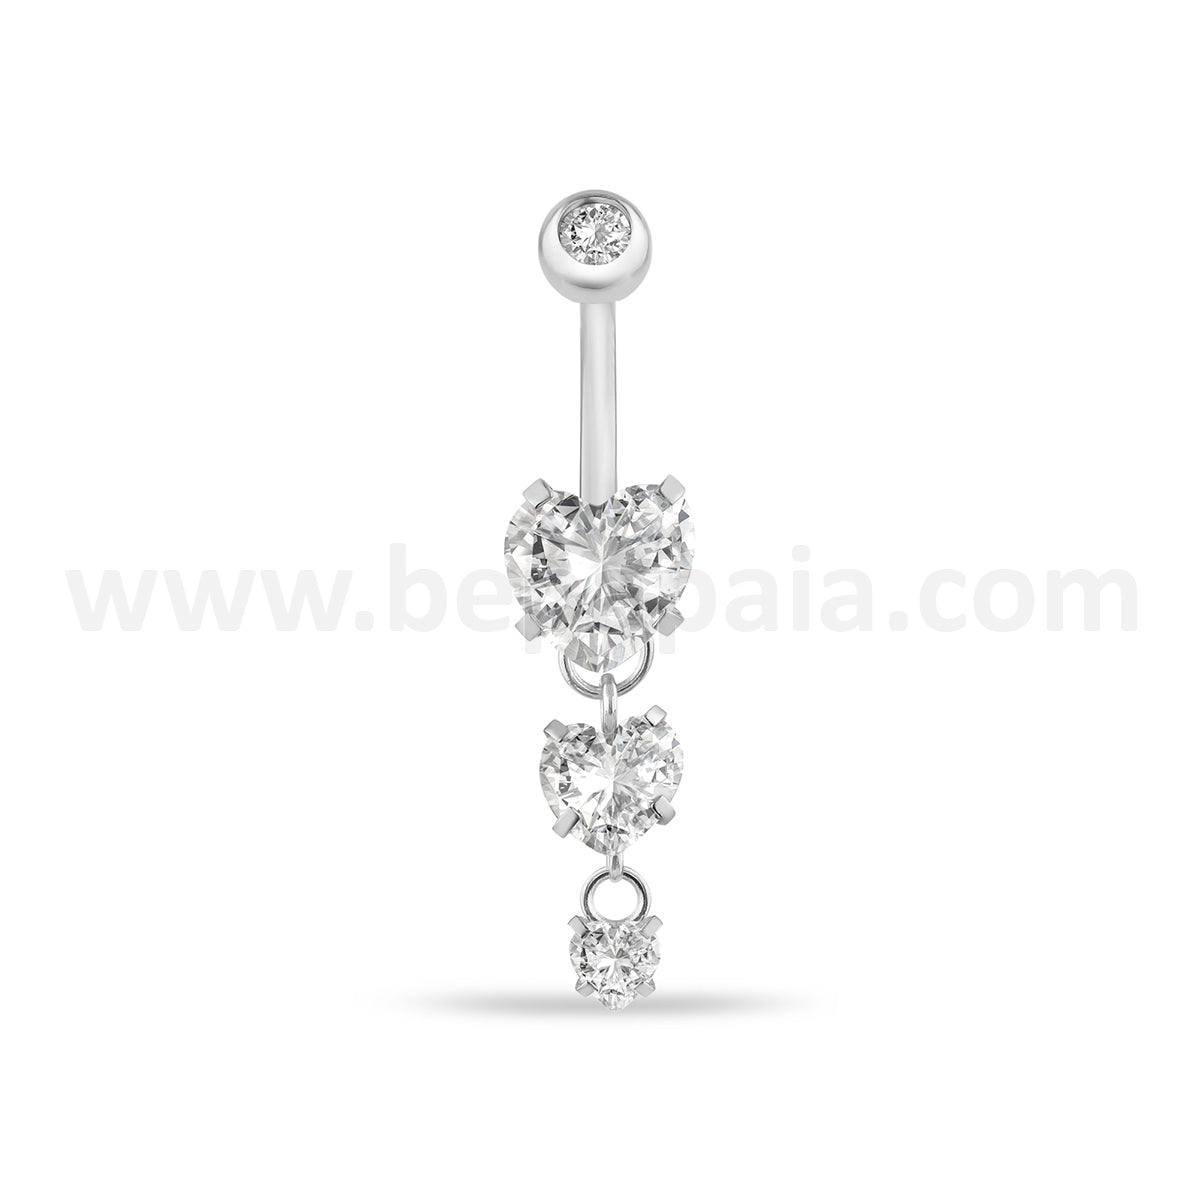 Surgical steel belly ring with 3 cubic zirconia